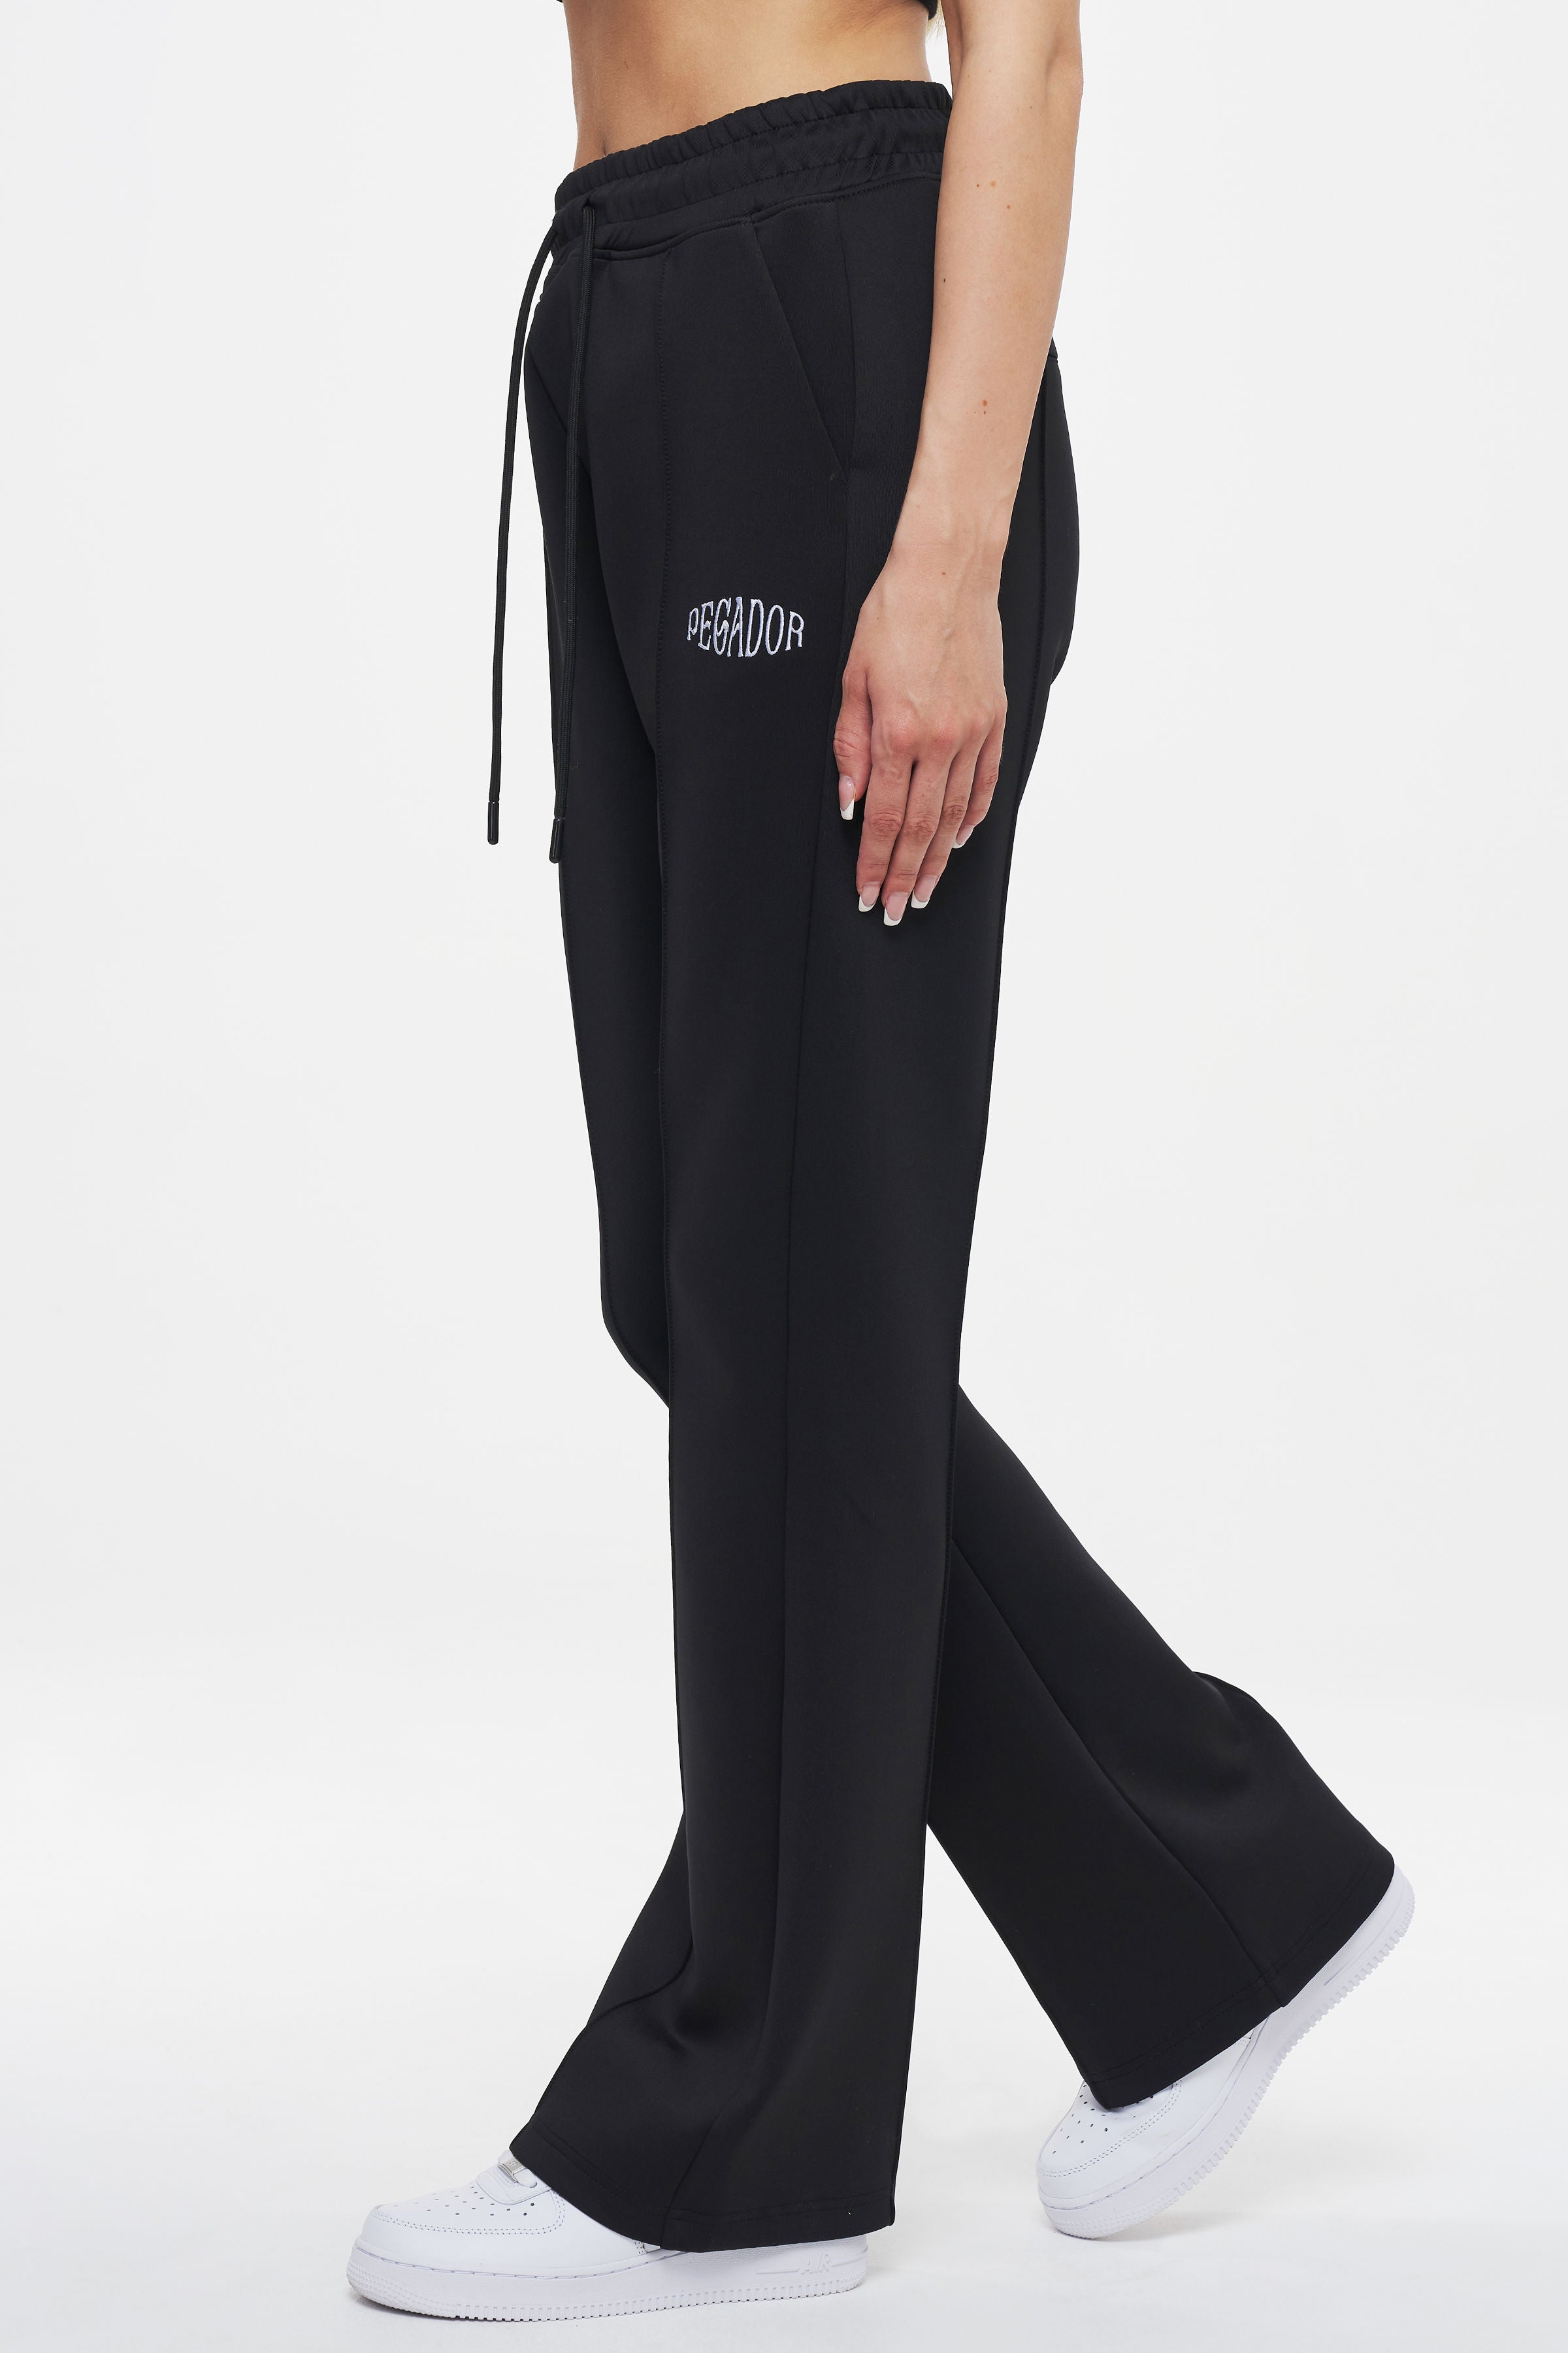 Nola Flared Track Pants Black Bottoms | Women Ahead of Time Female 